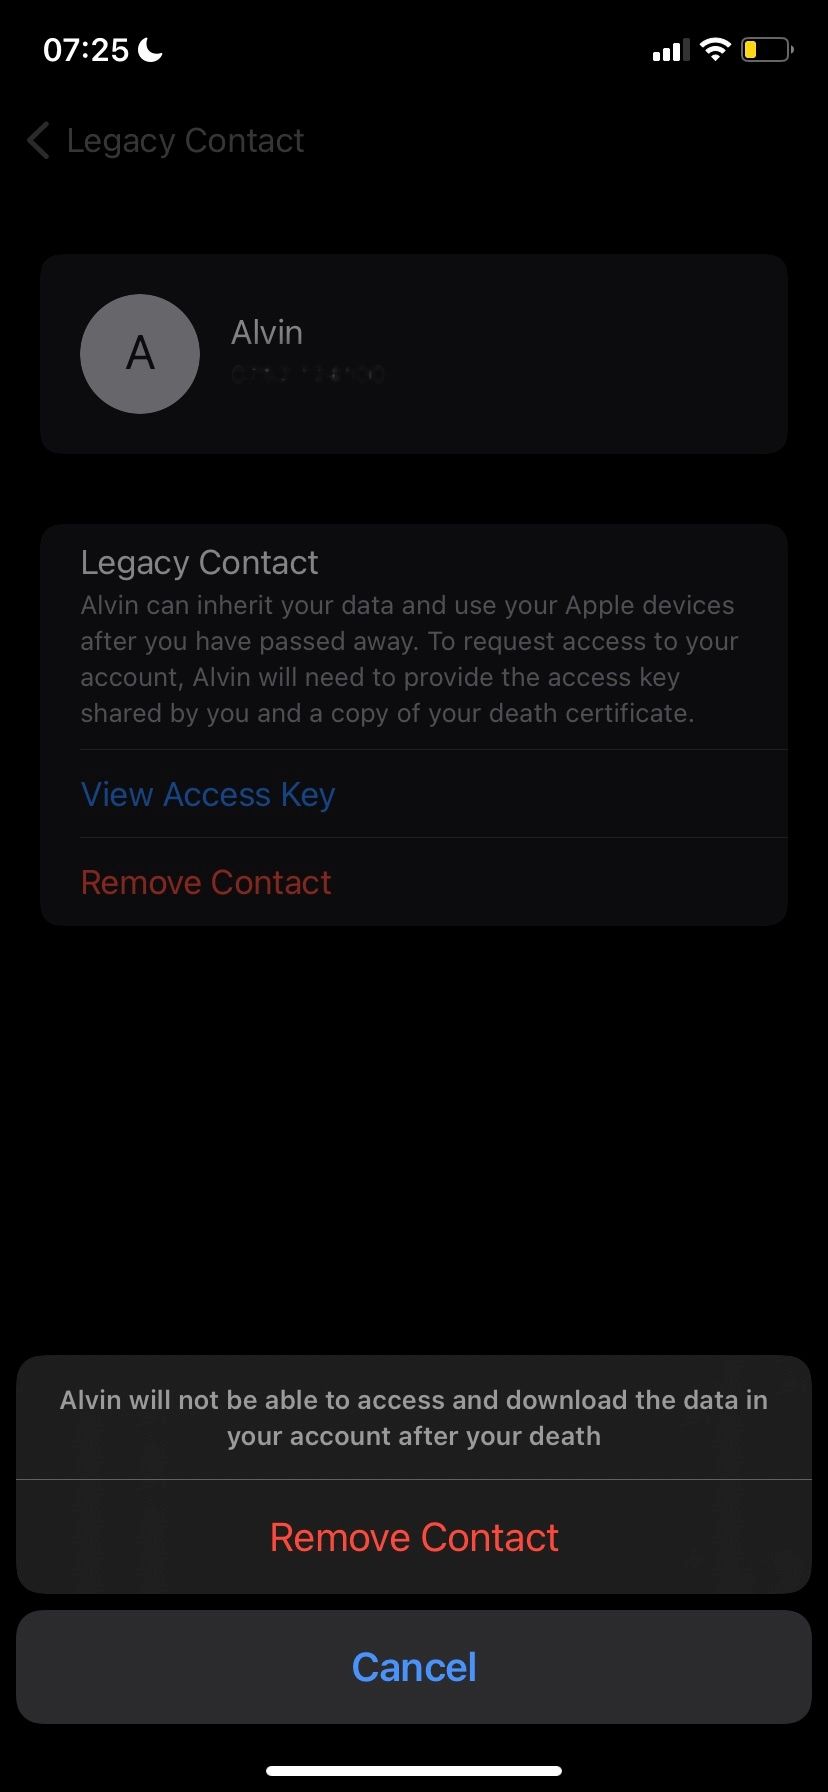 Removing Legacy Contact confirmation pop-up